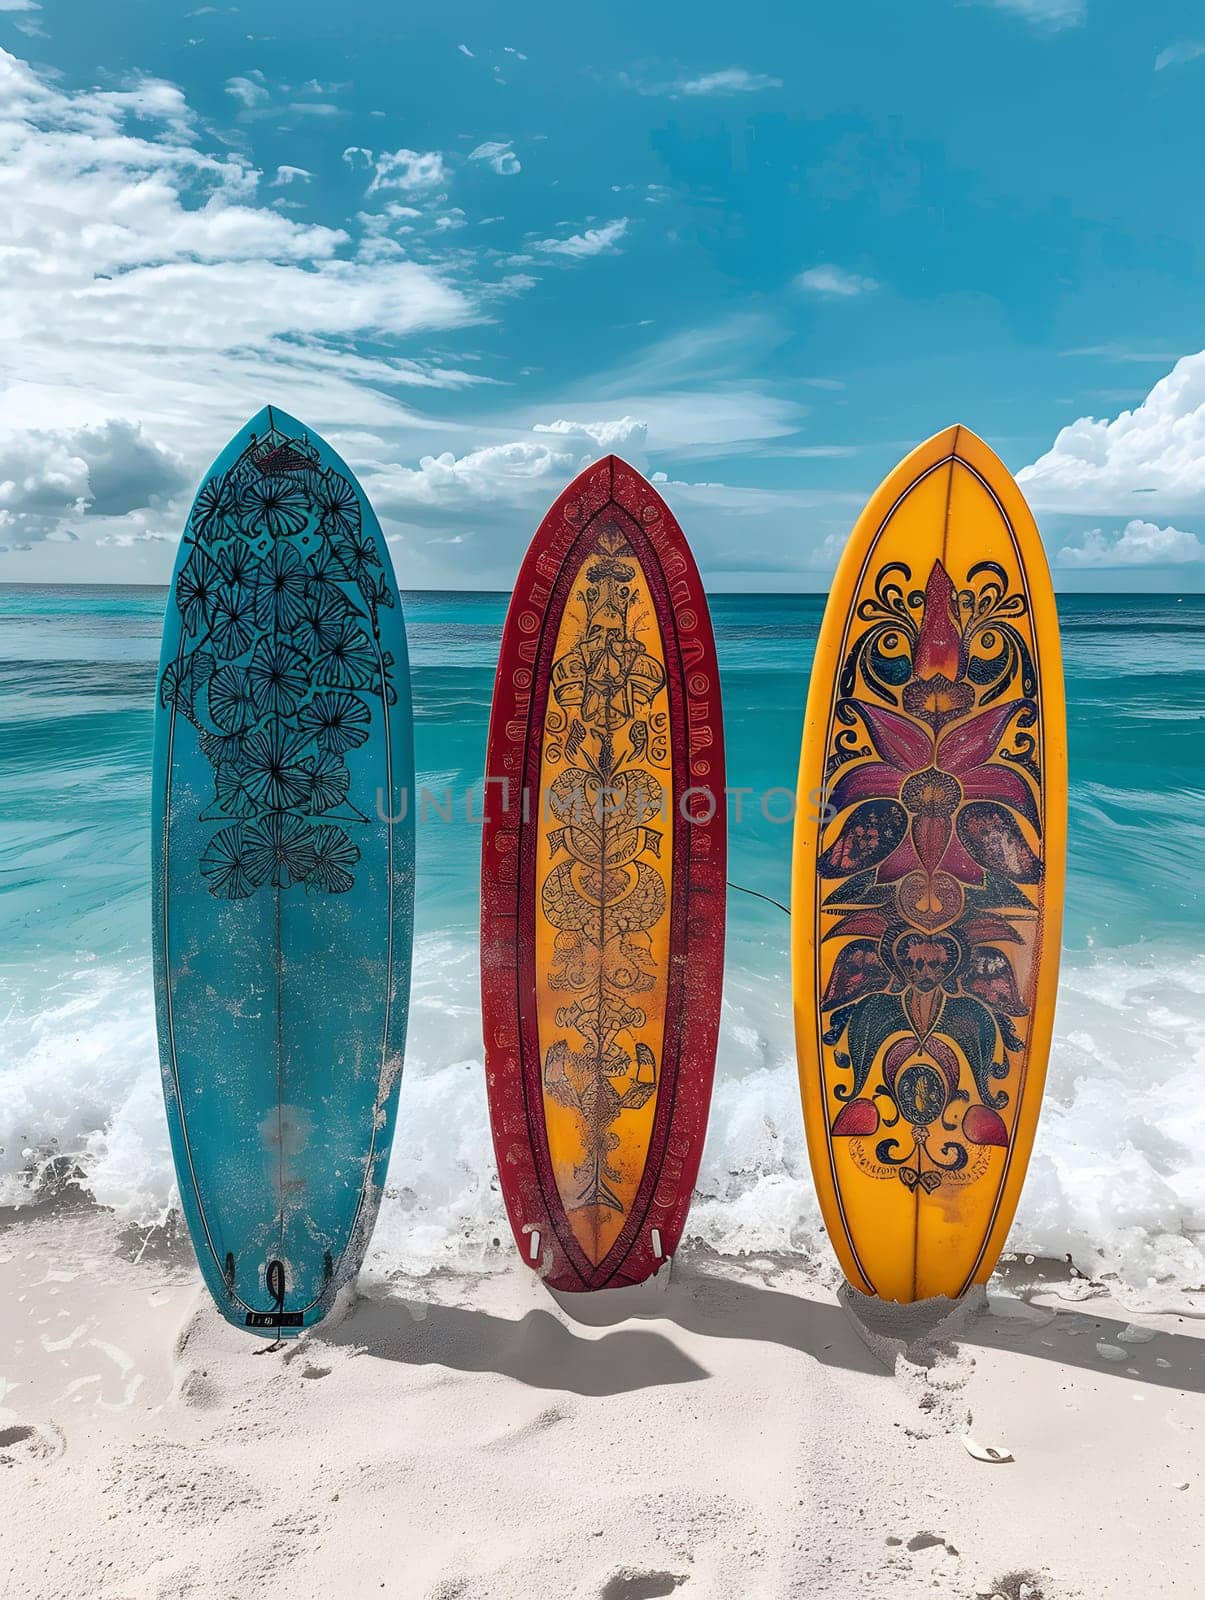 Three surfboards line the beach, Electric blue circles against natural material by Nadtochiy